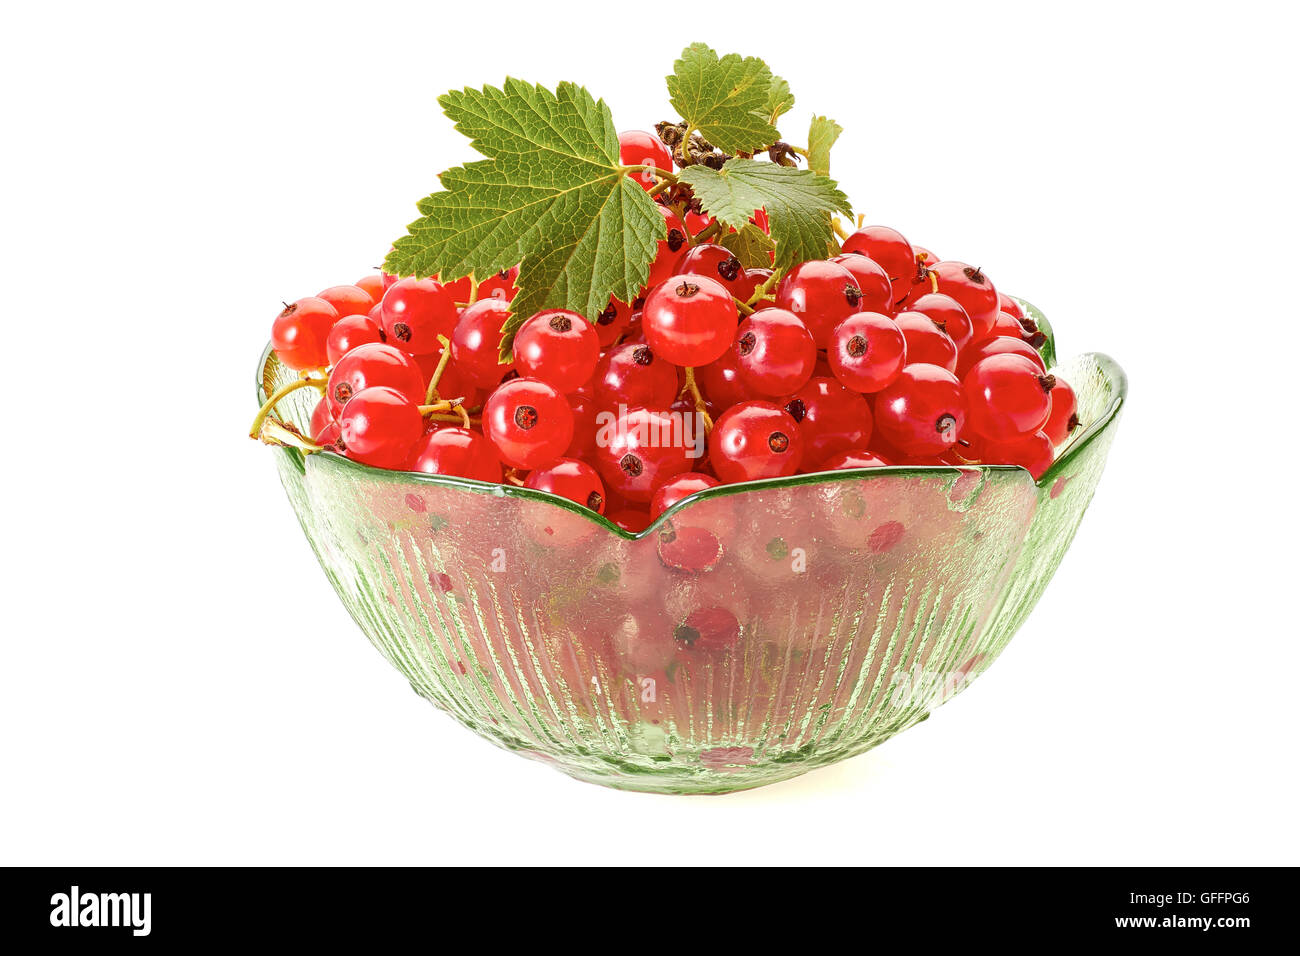 Red currant berries in green glass bowl on white Stock Photo